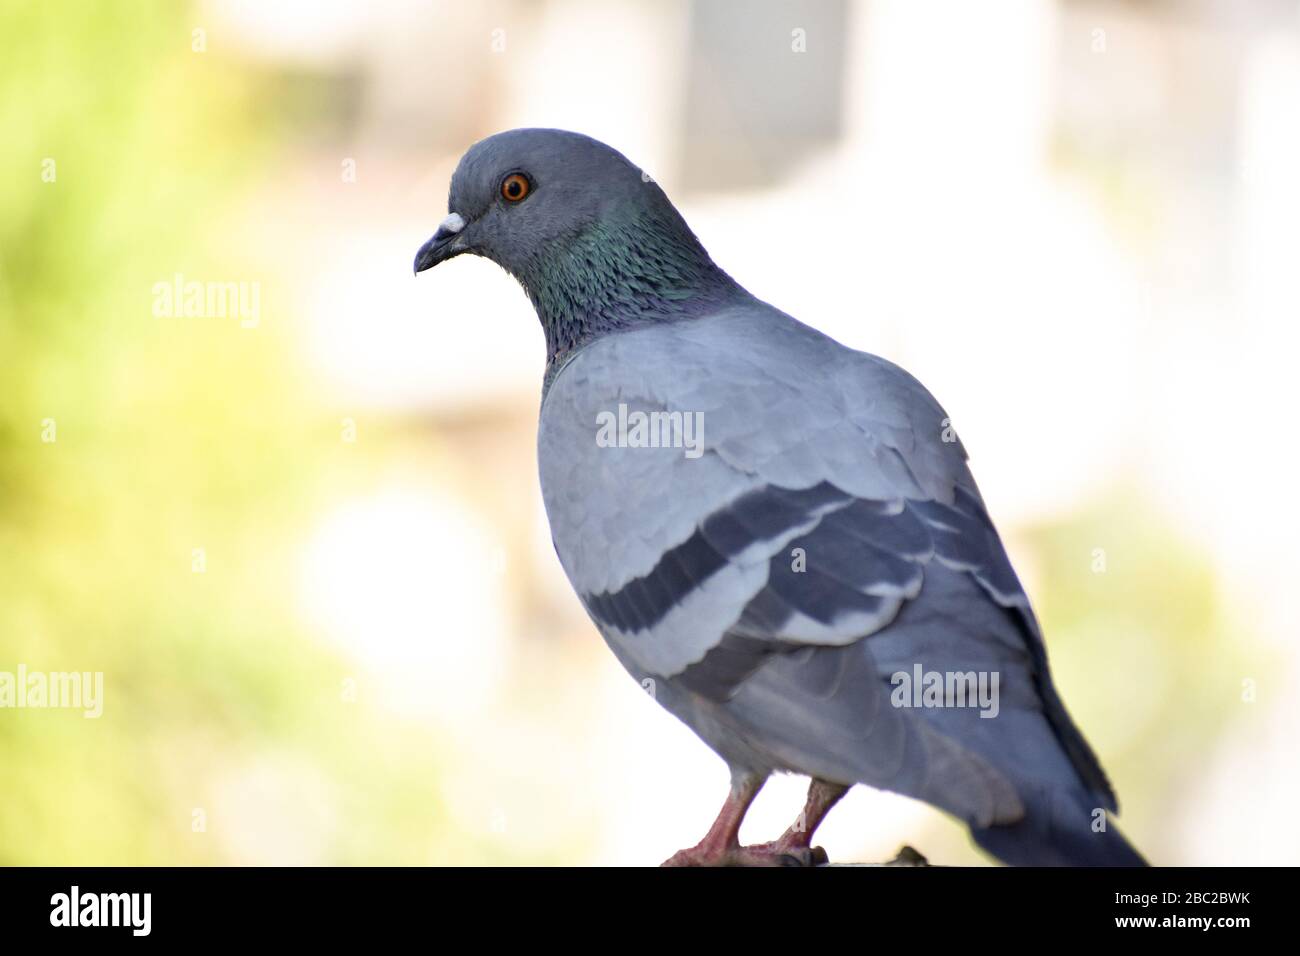 Pigeon resting on a terrace Stock Photo